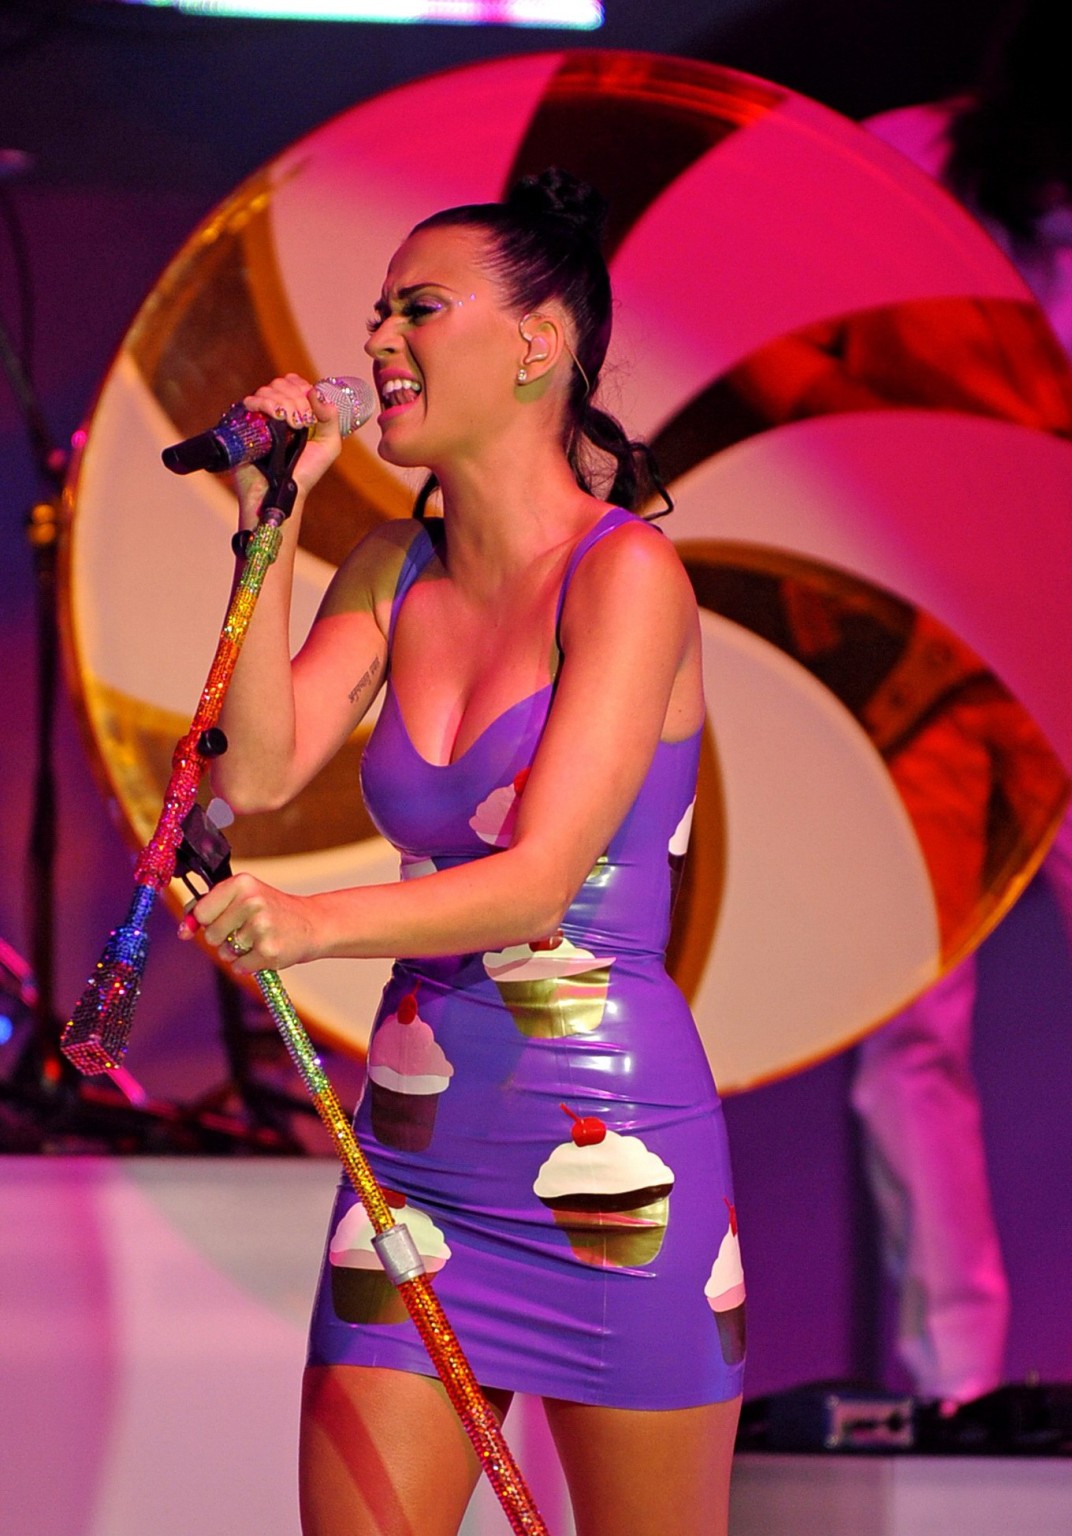 Katy Perry Busty In Tiny Latex Dress Performing At The Roseland Ballroom In Nyc Porn Pictures